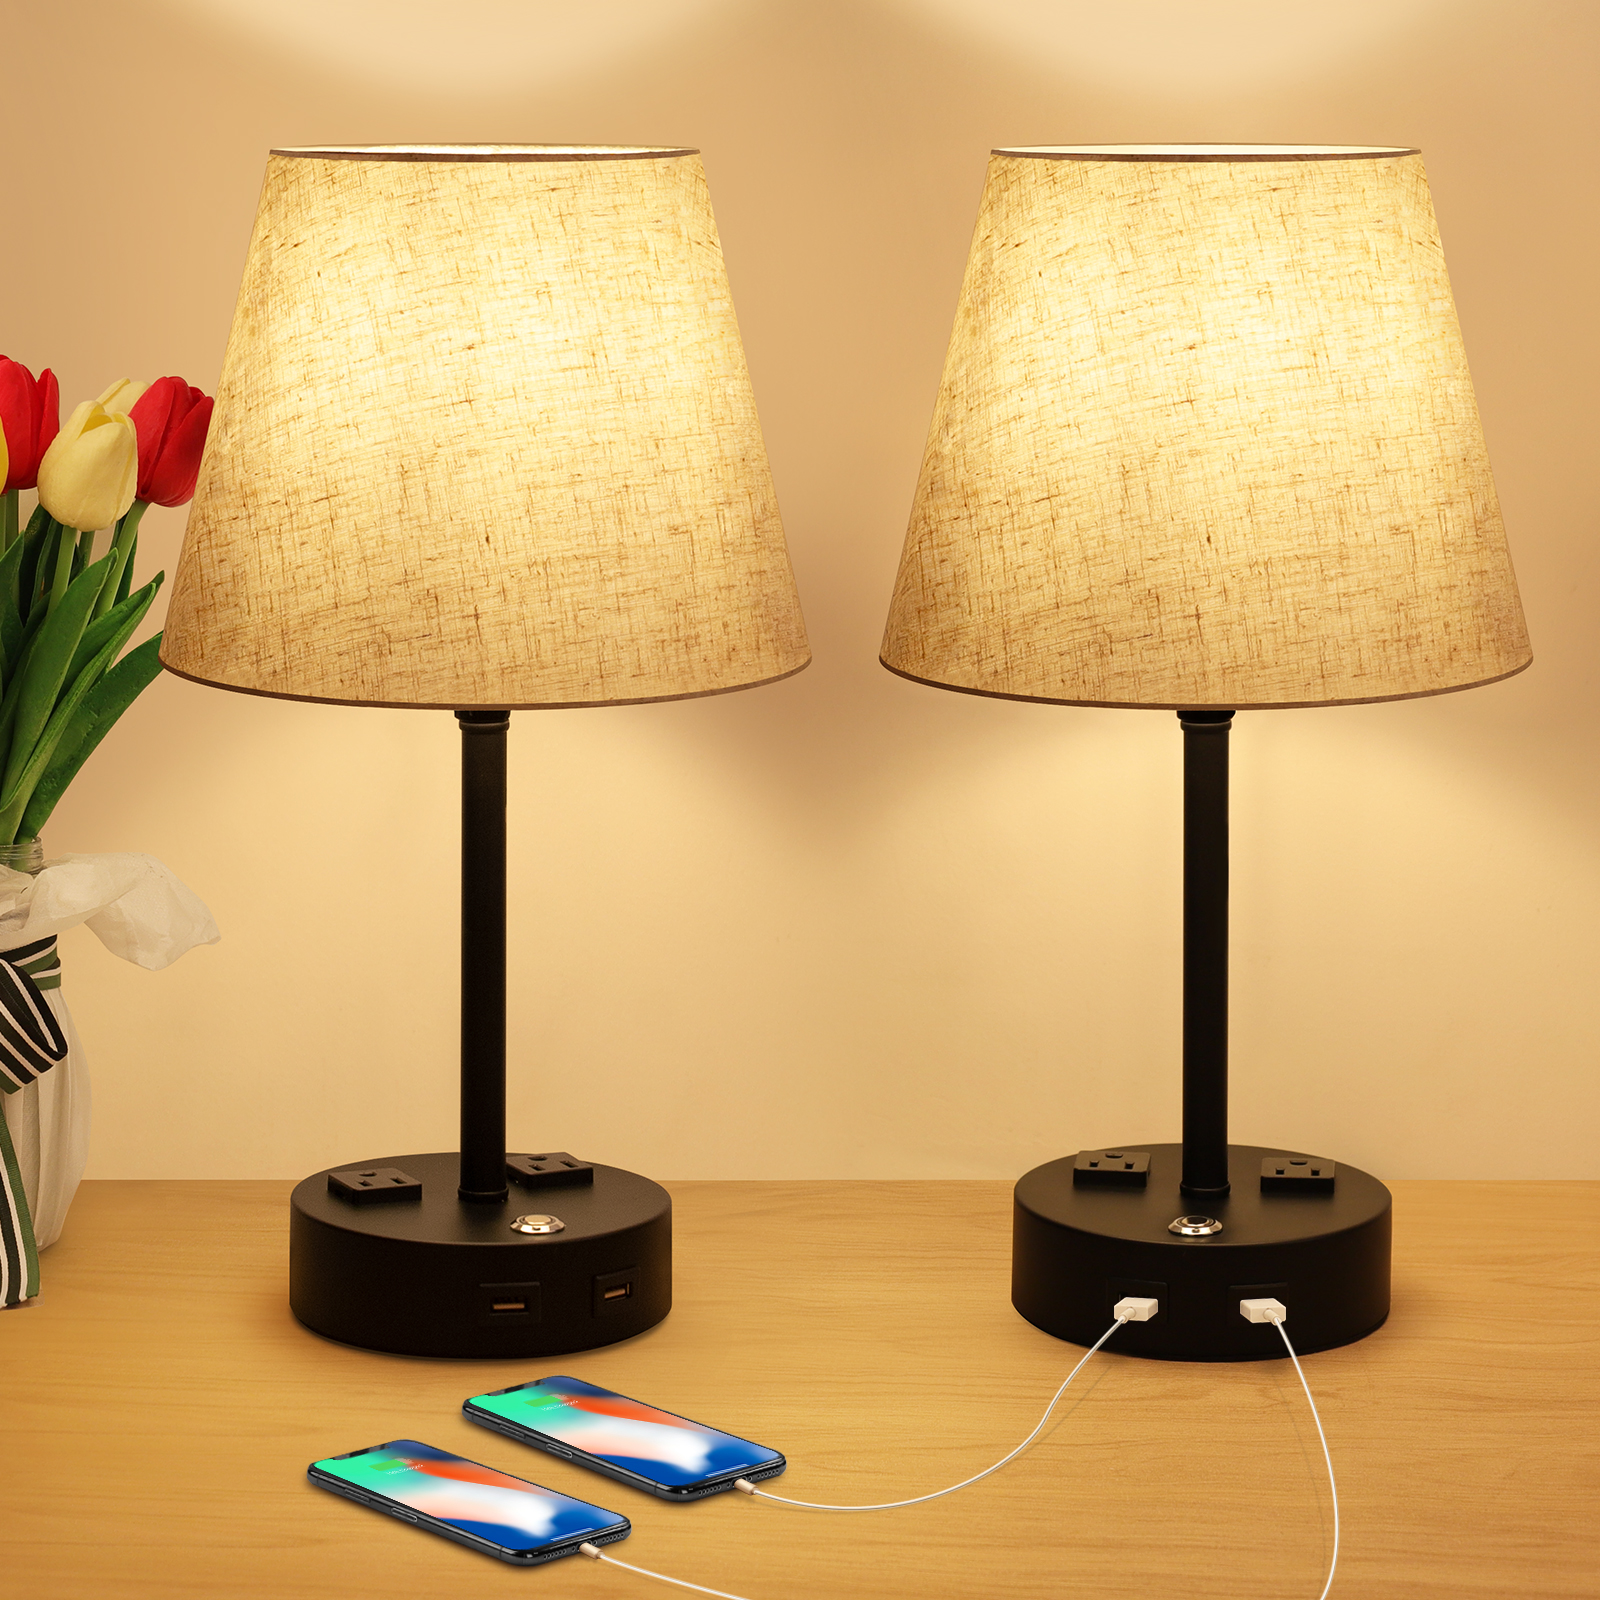 Bedroom Lamps, USB Nightstand Lamp, Dimmable Bedside Lamps Set Of 2